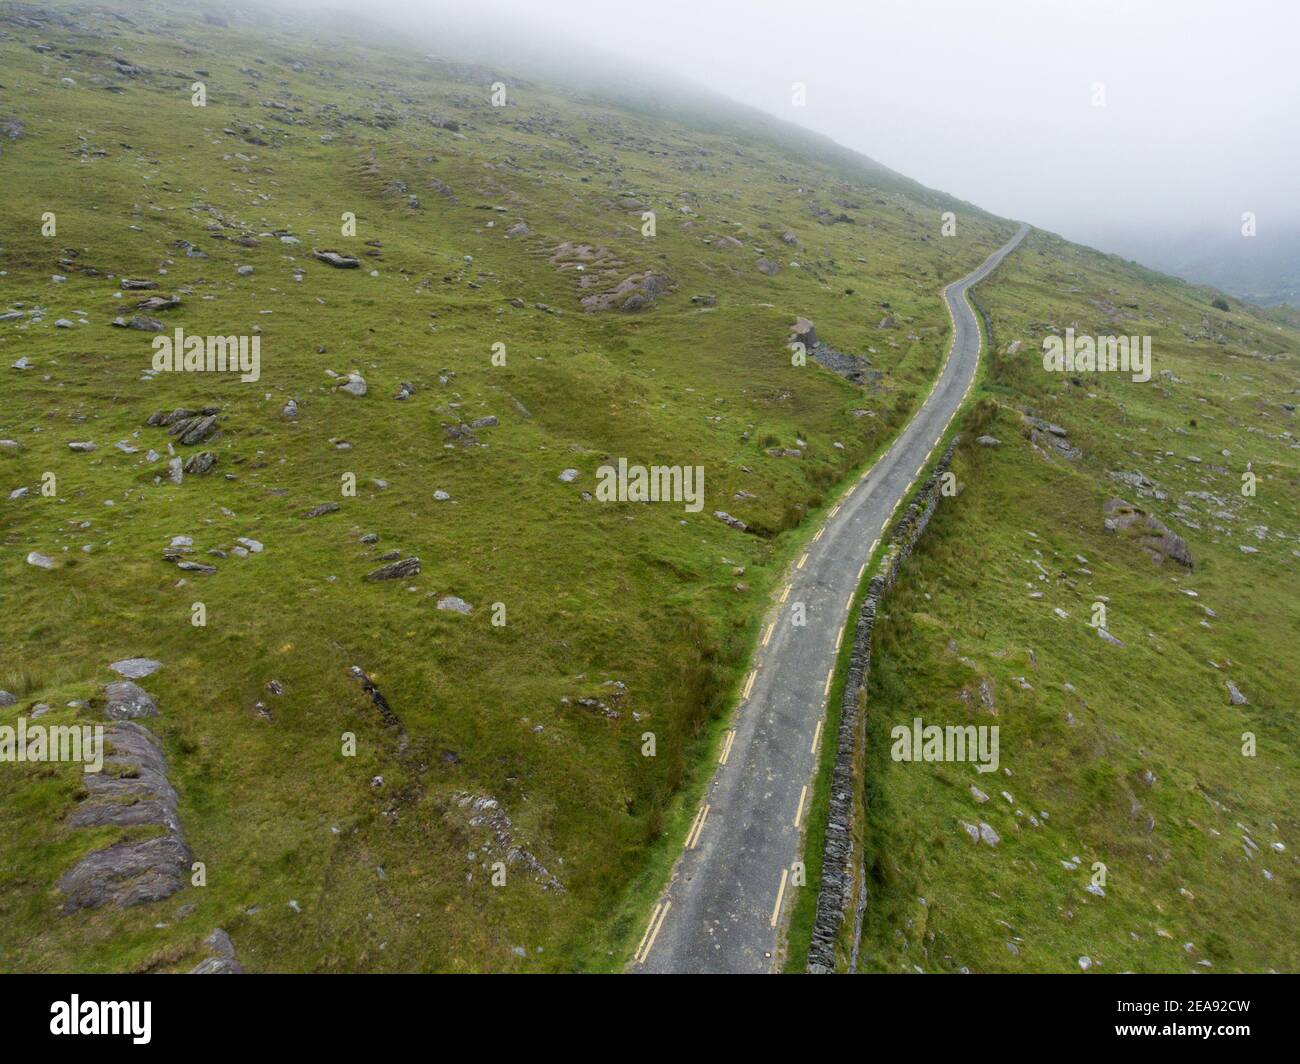 A winding rural mountainous road (R574) on the Ring of Beara in County Kerry, Ireland. Stock Photo